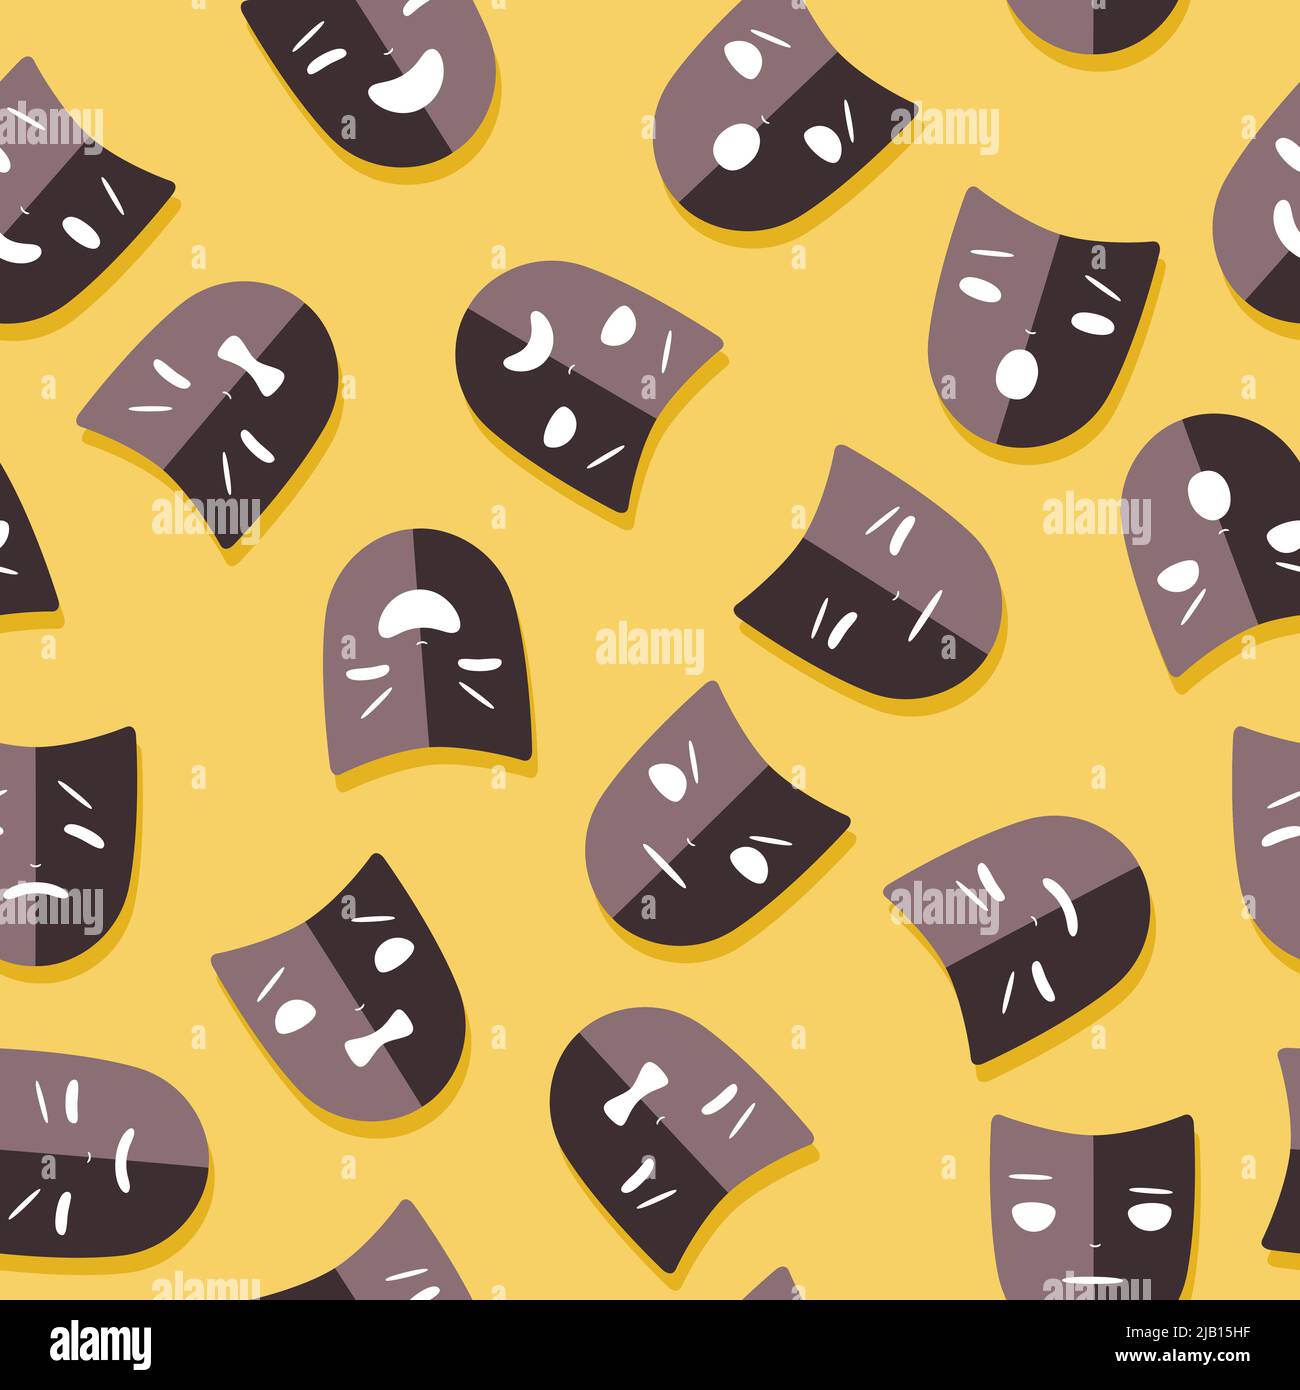 Seamless background pattern with theatrical masks vector illustration Stock Vector